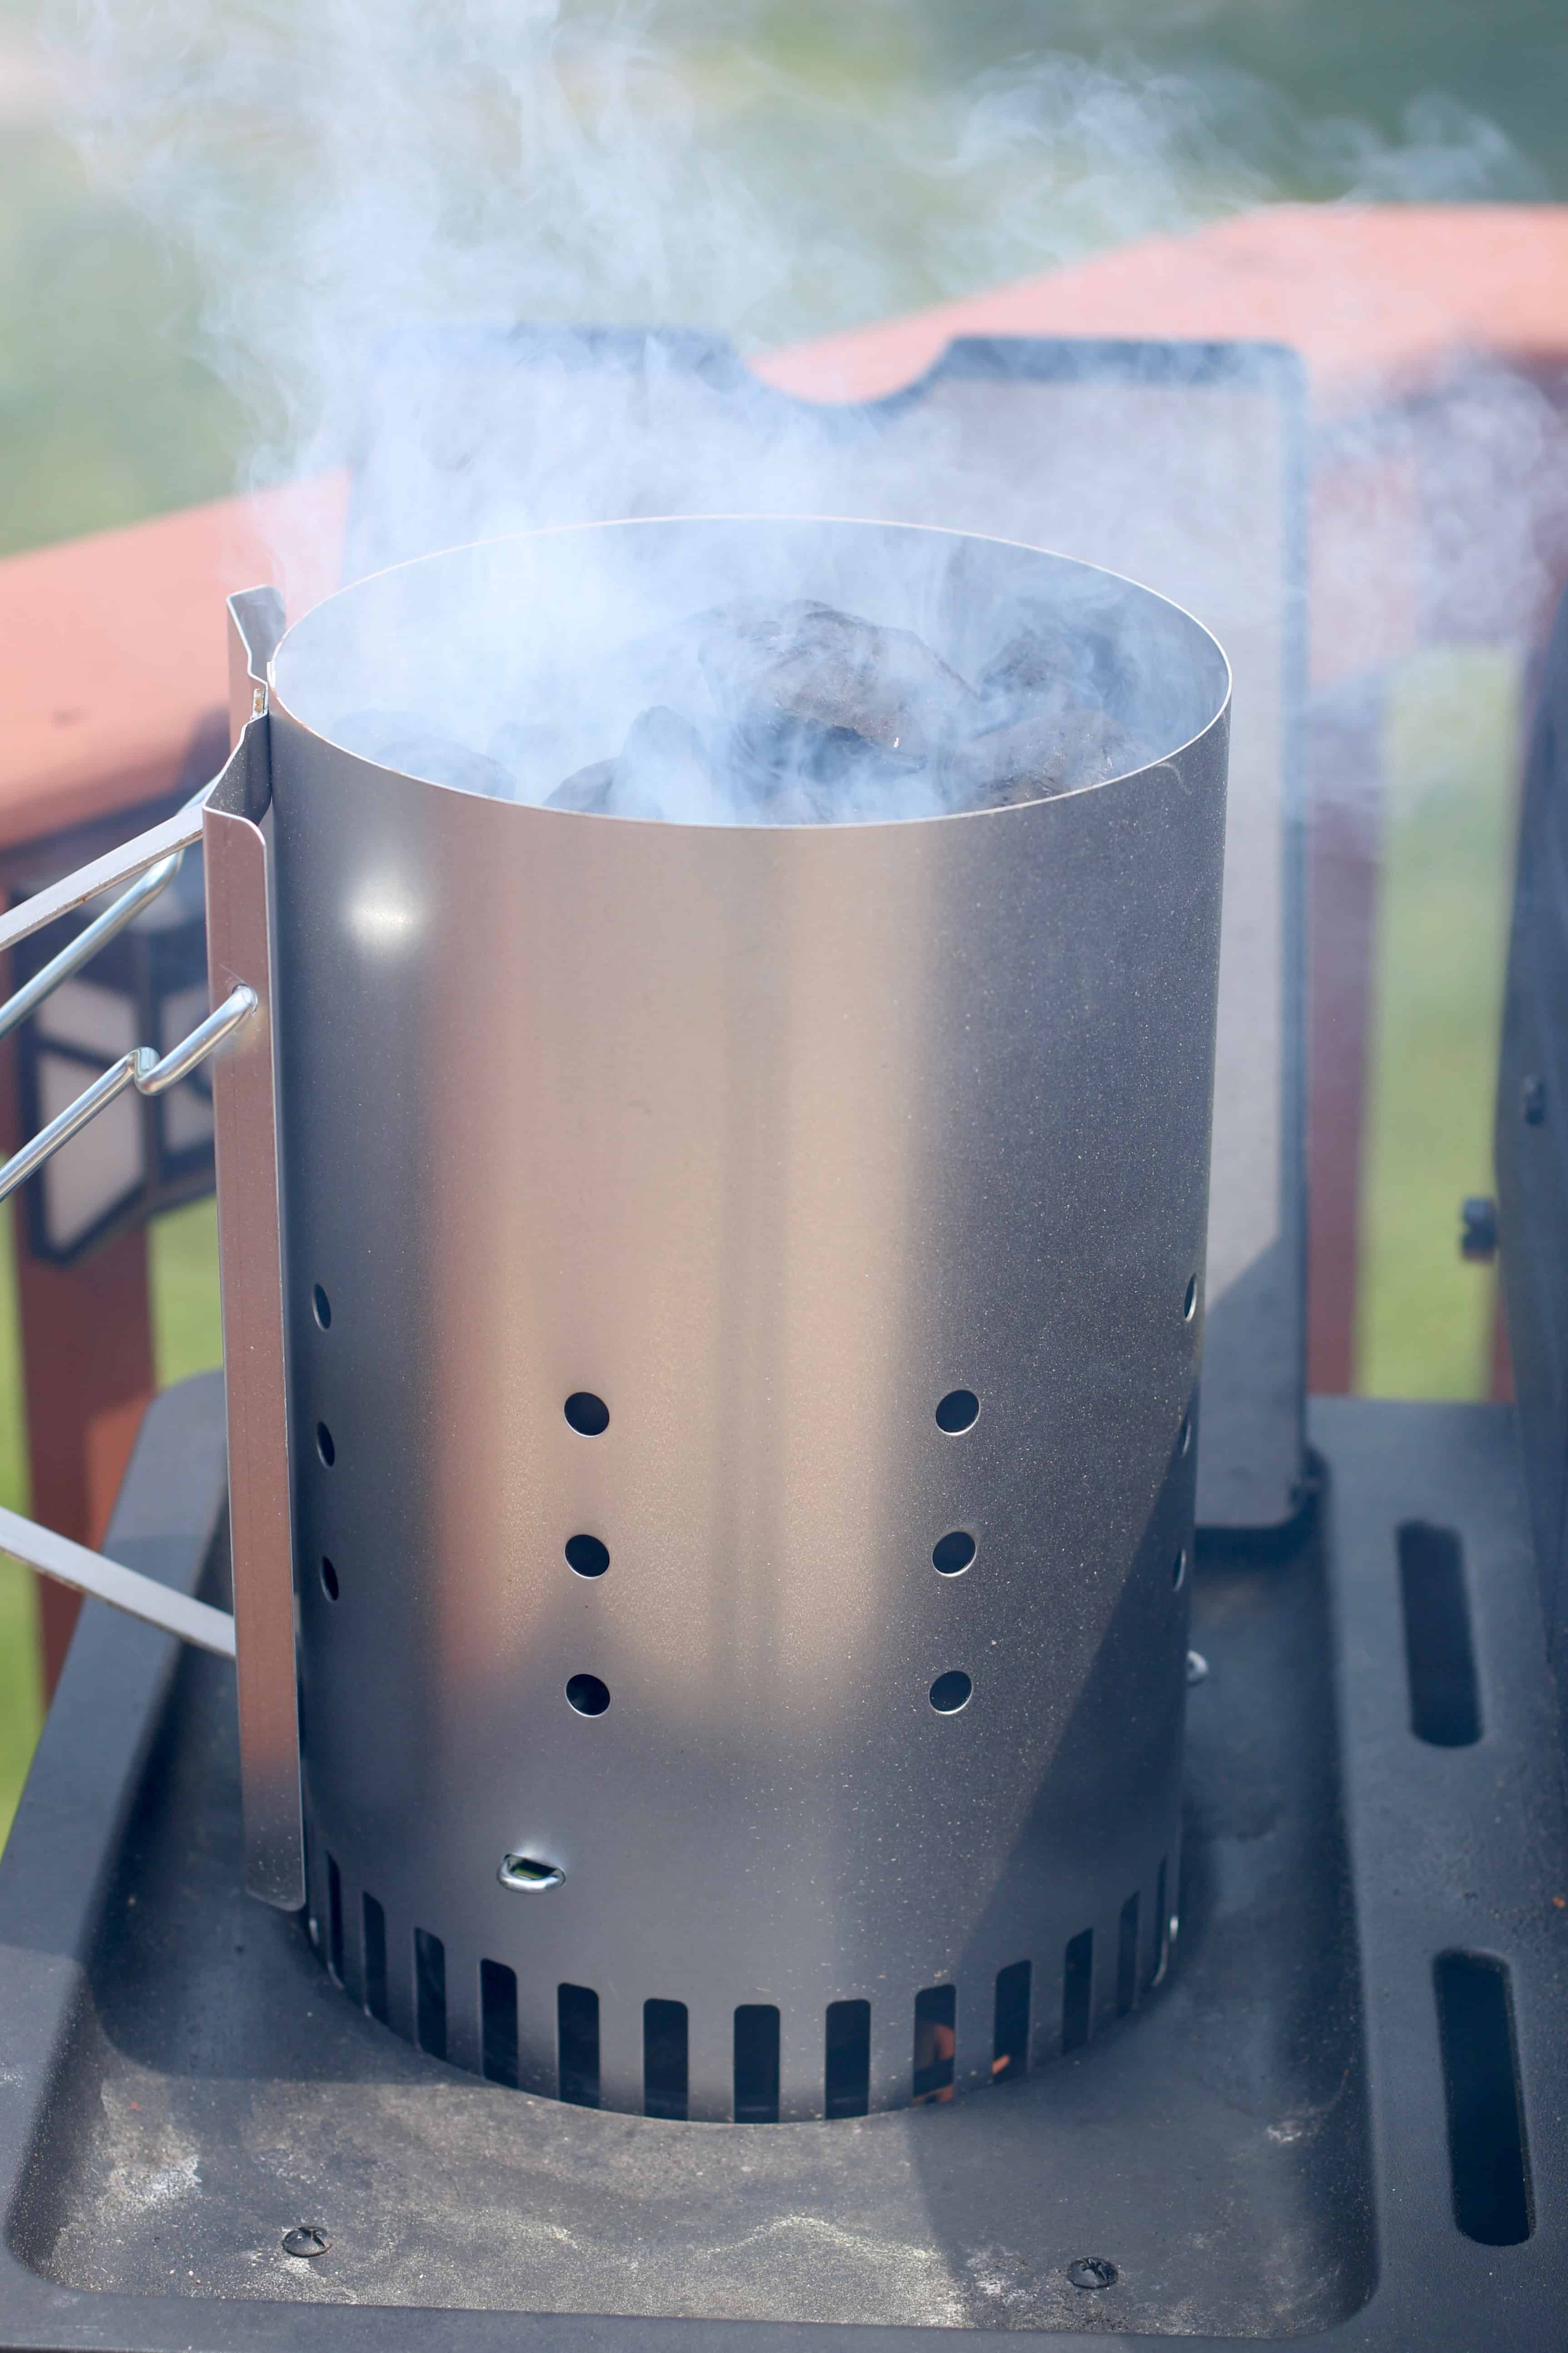 charcoal briquets creating smoke in a chimney starter.